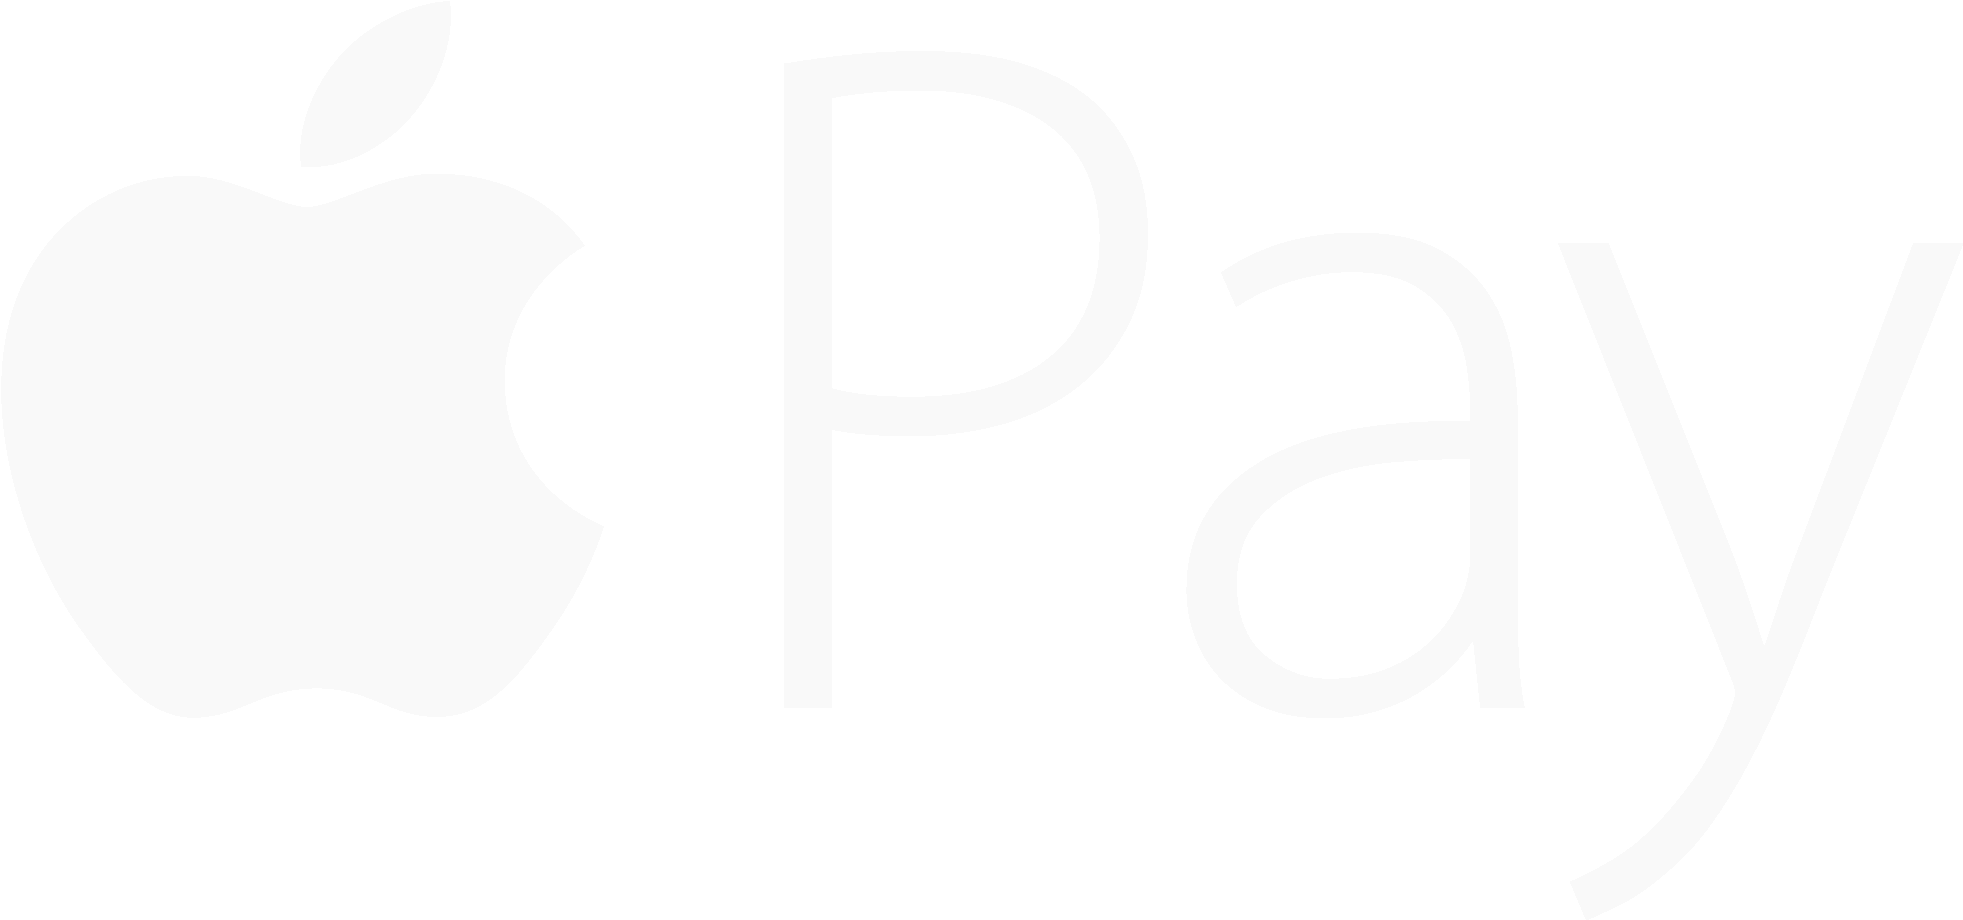 File:LINE Pay logo (2019).svg - Wikimedia Commons